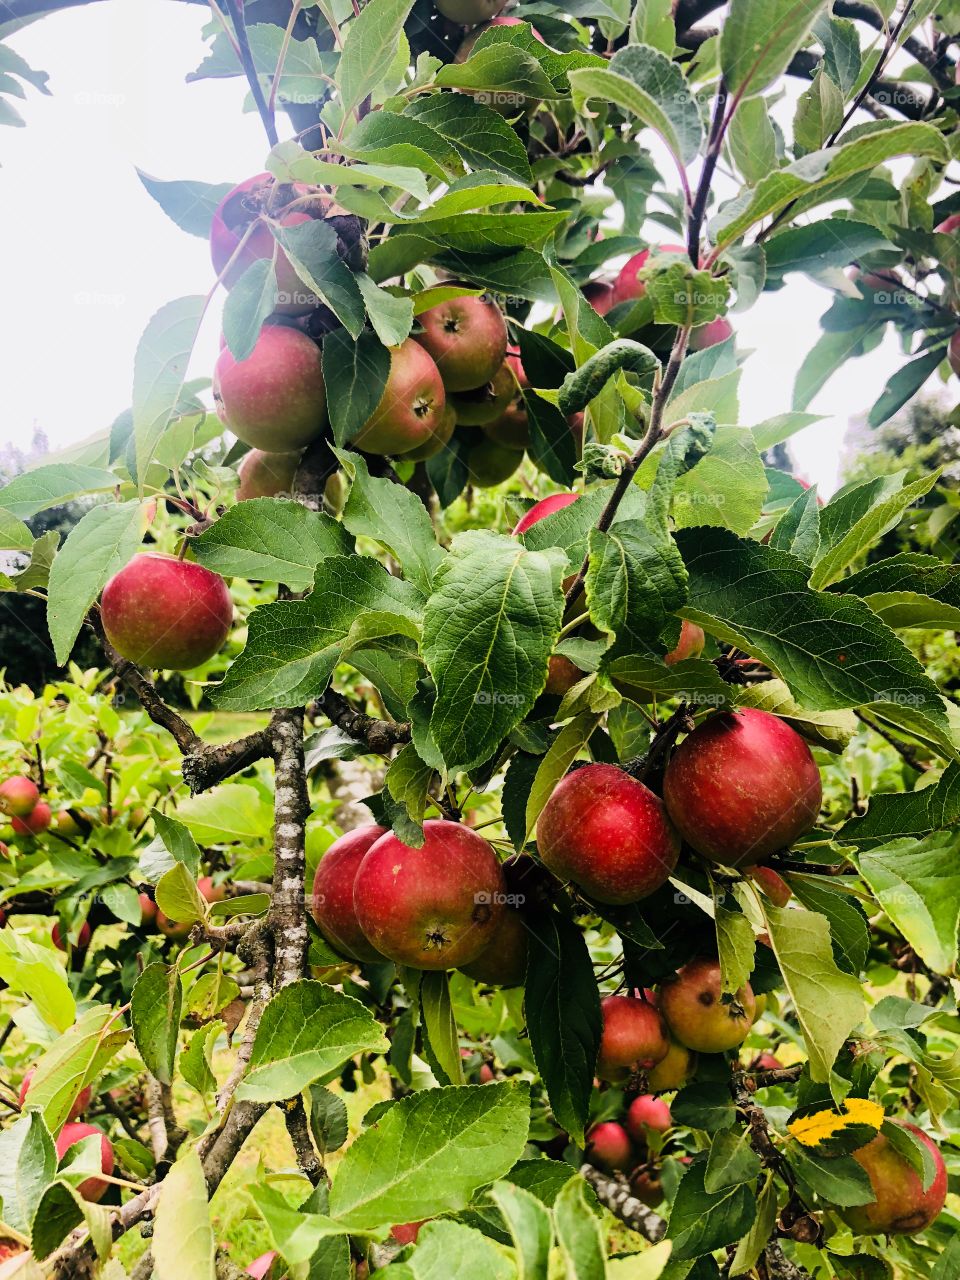 Apple tree bursting with red apples.